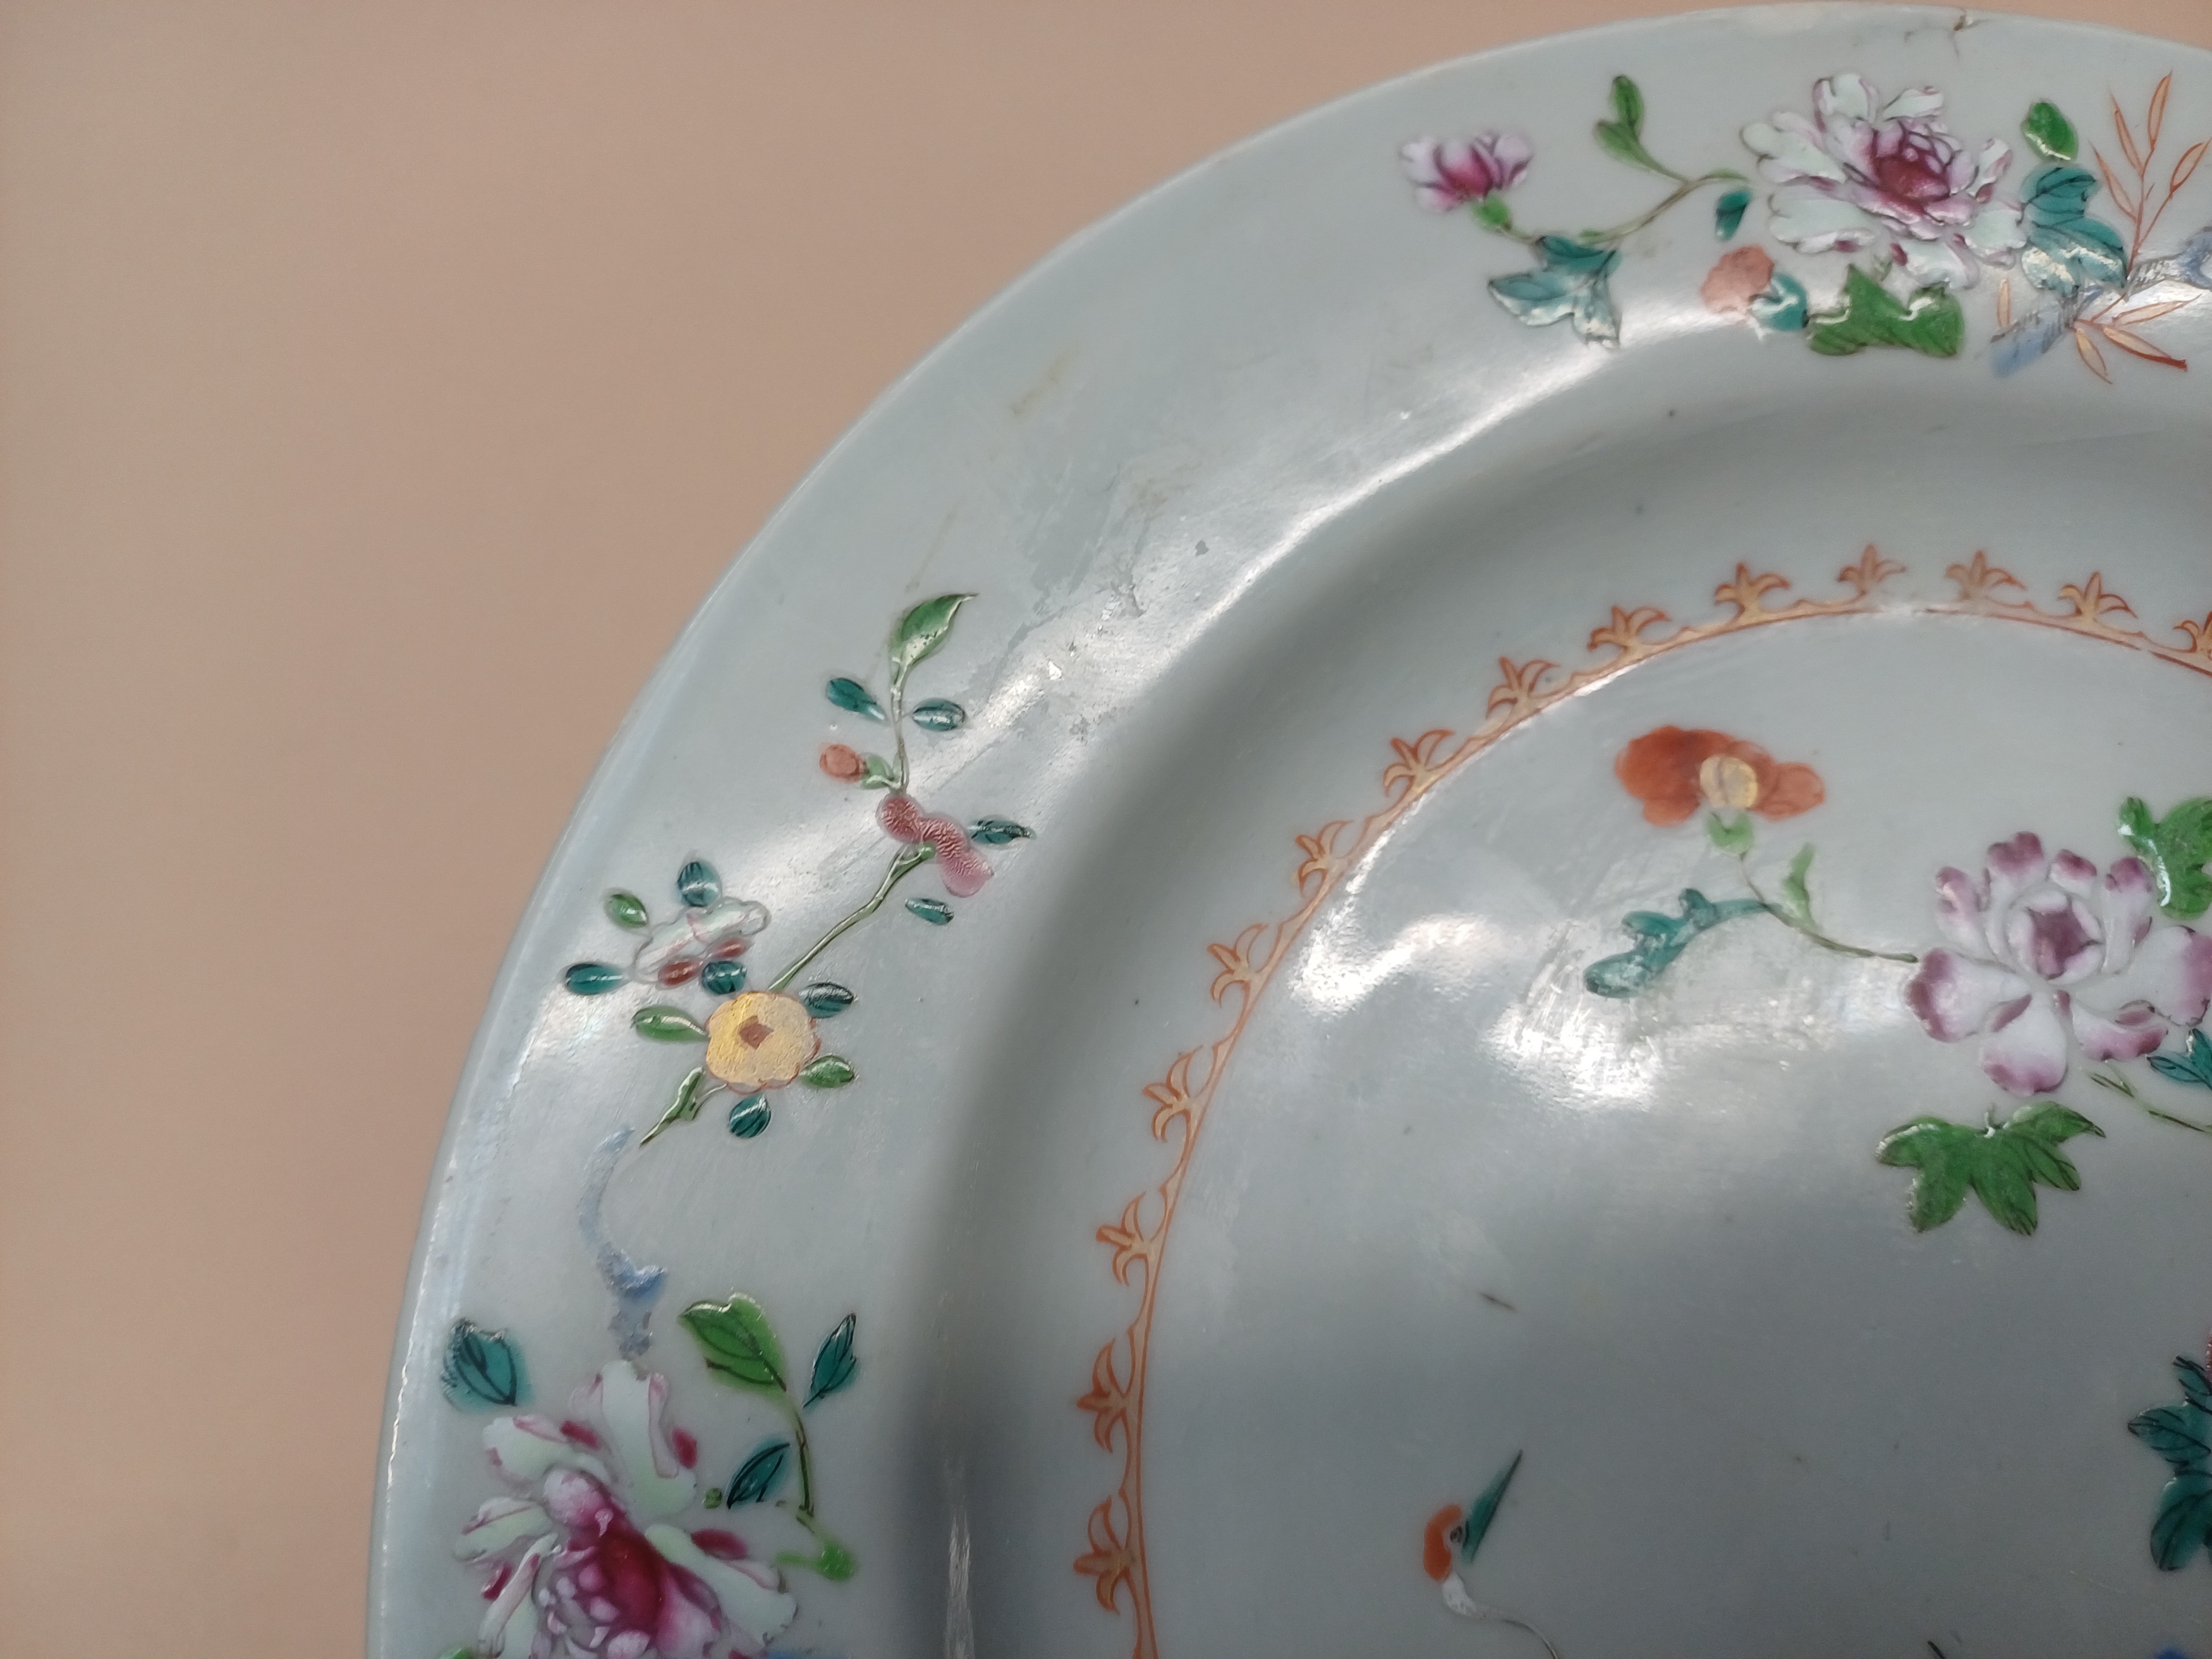 TWO CHINESE EXPORT FAMILLE-ROSE 'CRANES AND BLOSSOMS' DISHES 清十八世紀 外銷粉彩牡丹鶴紋盤兩件 - Image 11 of 15